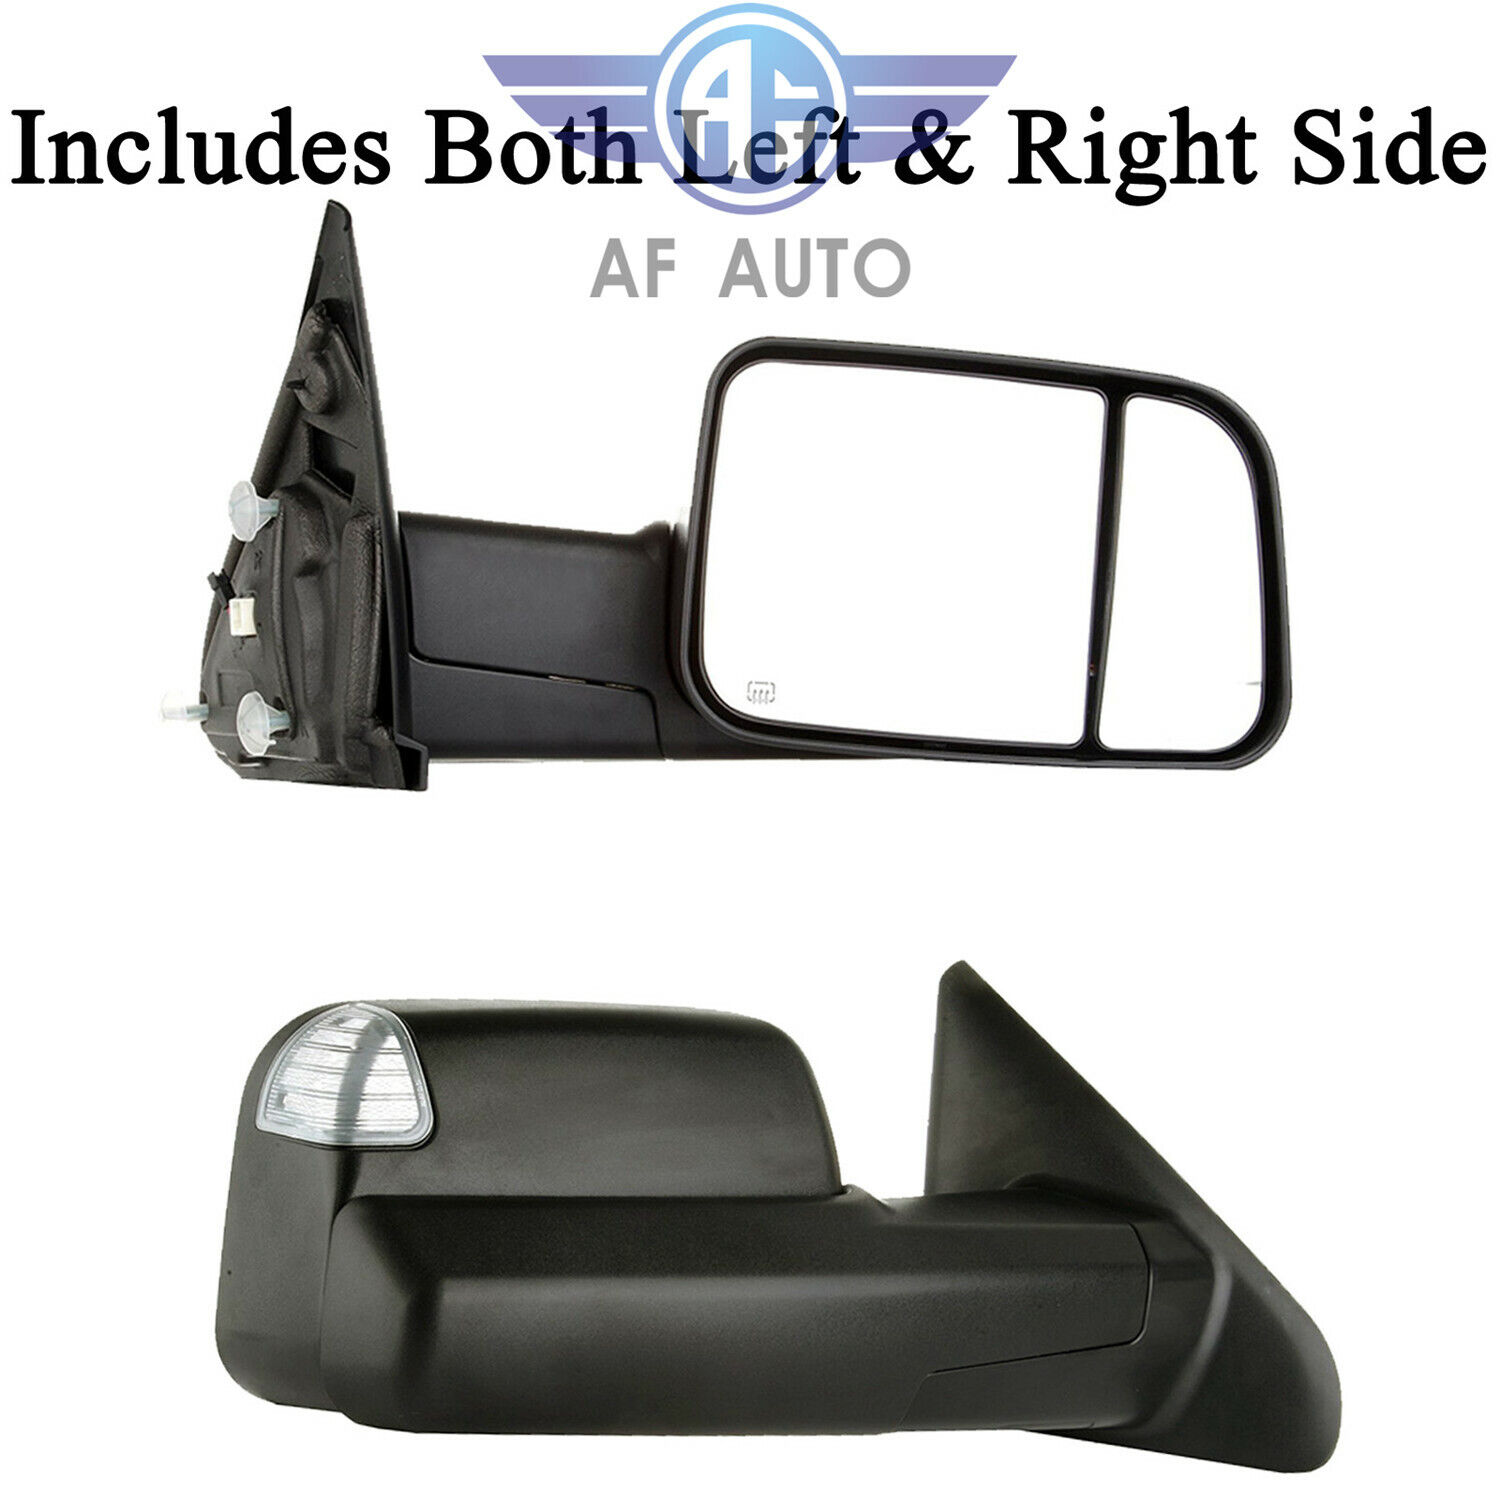 Black Power Heated Towing Mirrors For 2009-2015 Dodge Ram 1500 2500 3500 Pickup